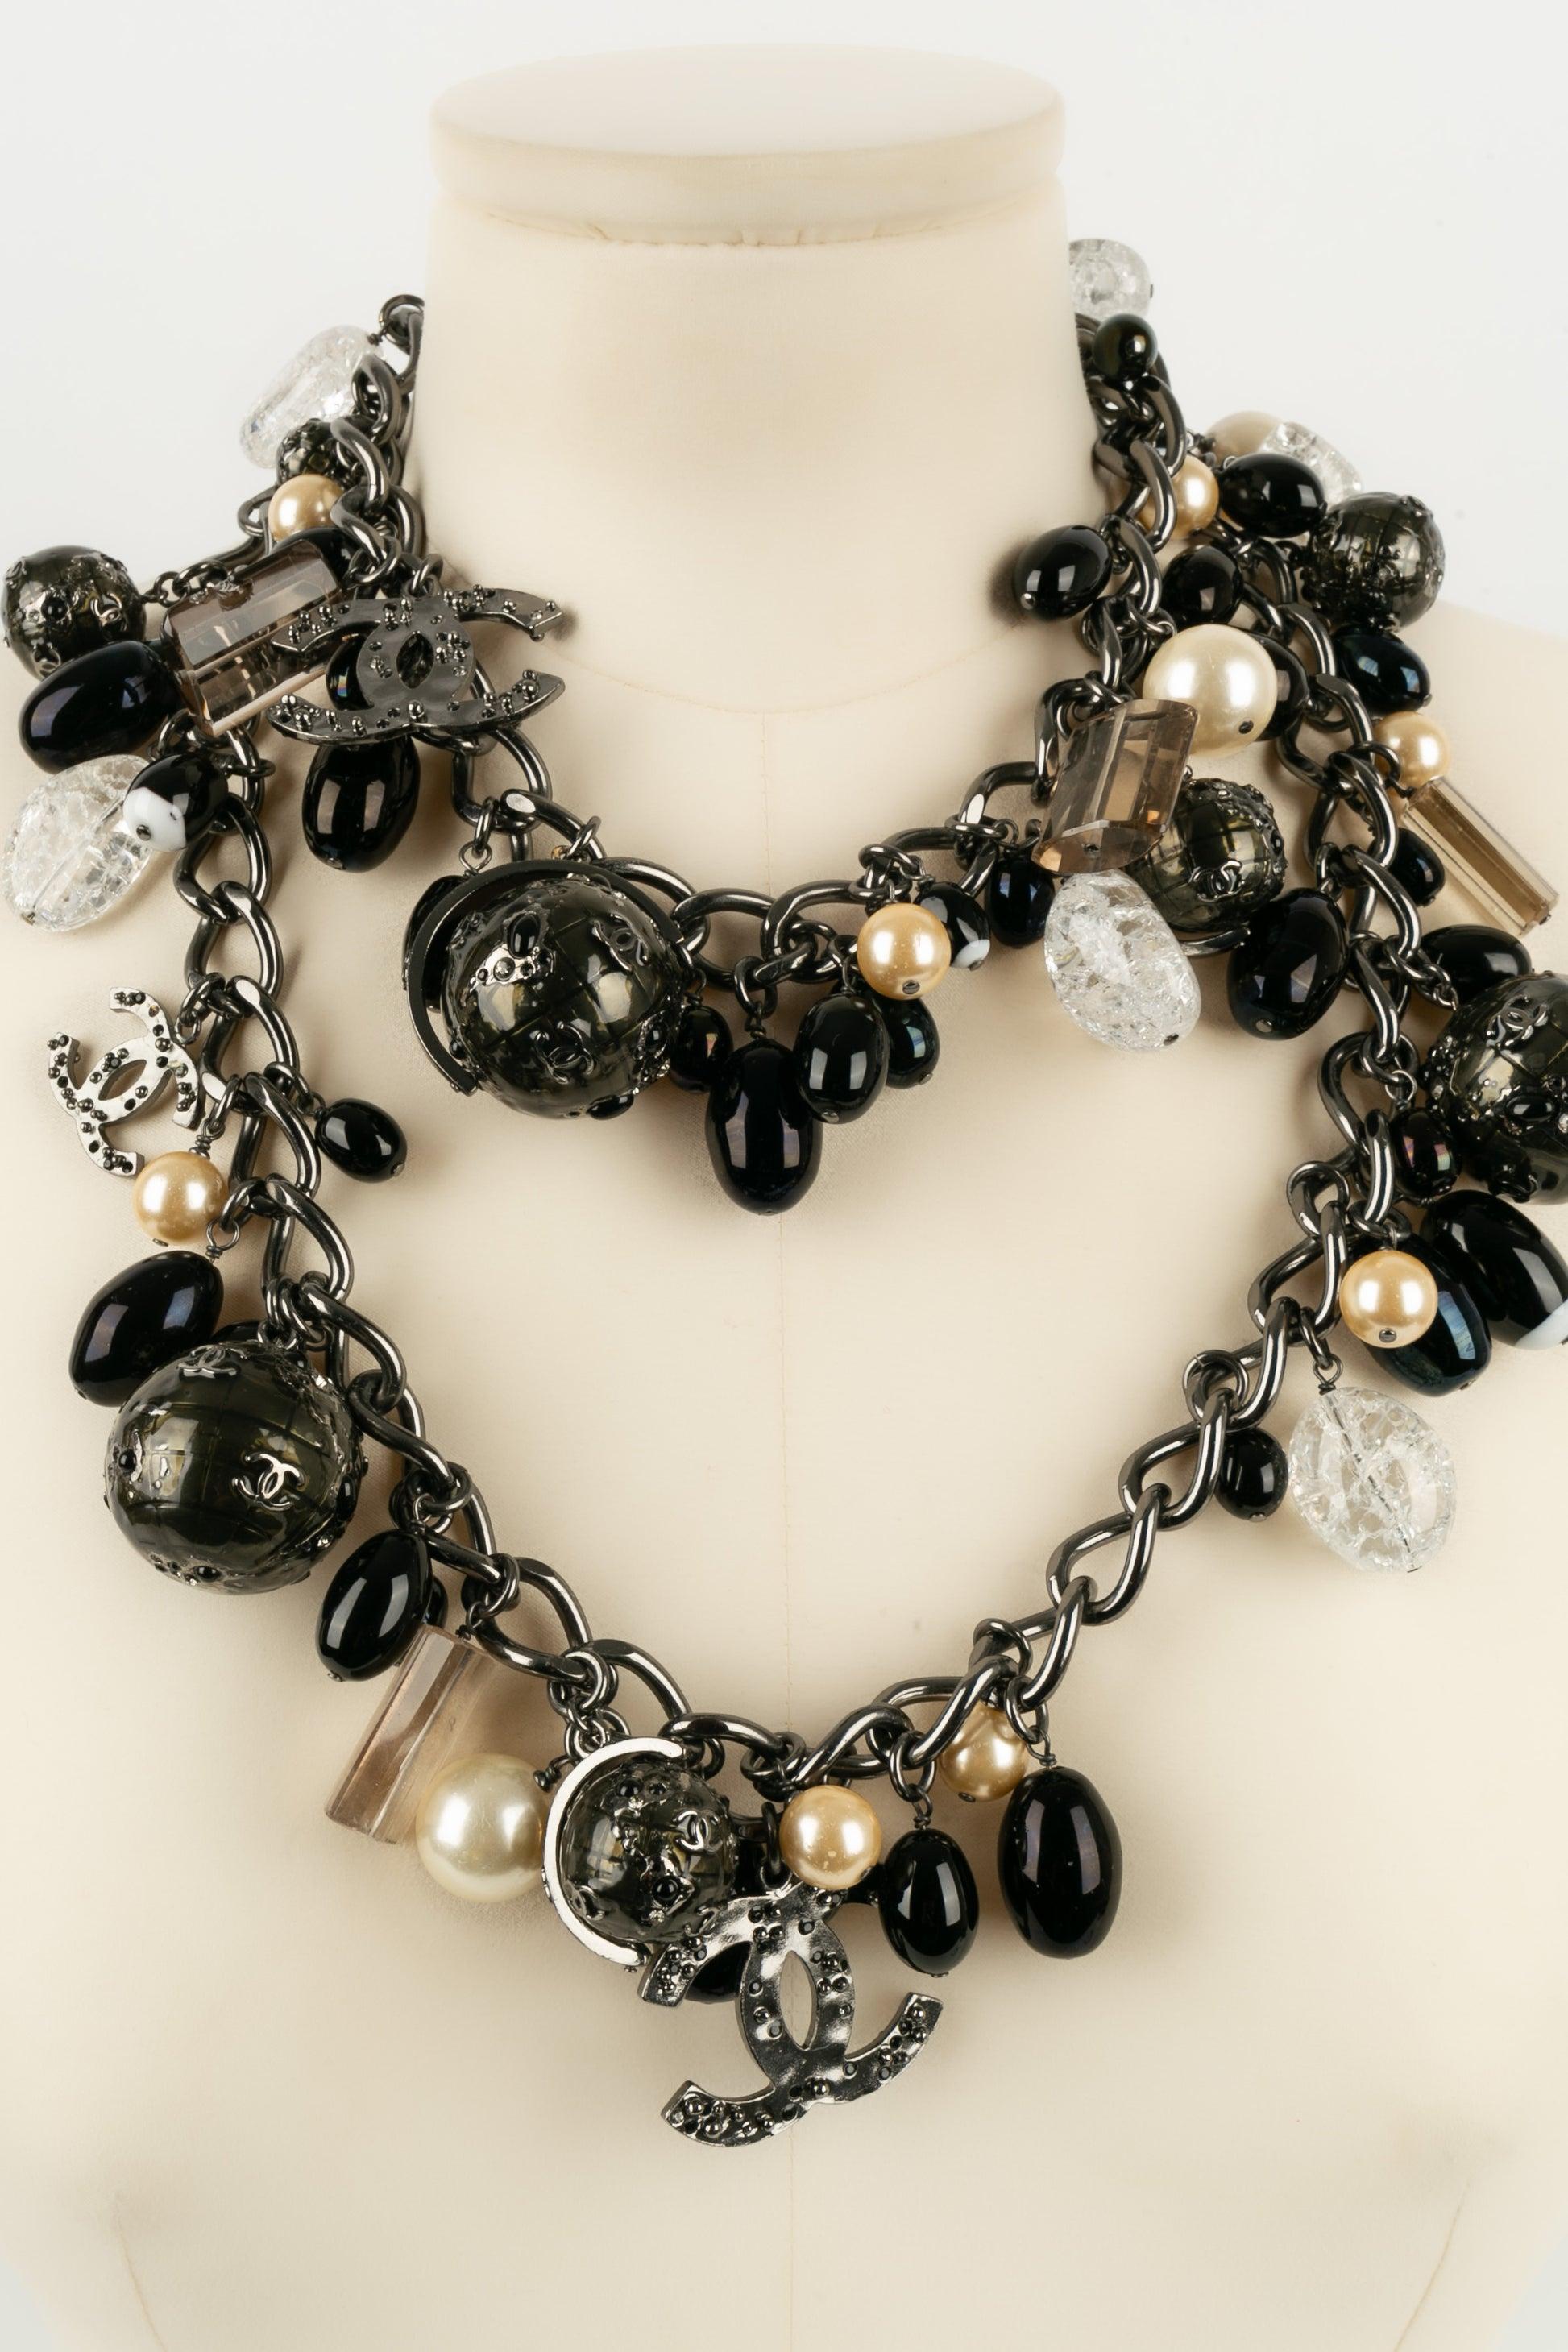 Chanel Necklace in Dark Silver Plated Metal in Black and Pearly Tones, 2004 For Sale 6